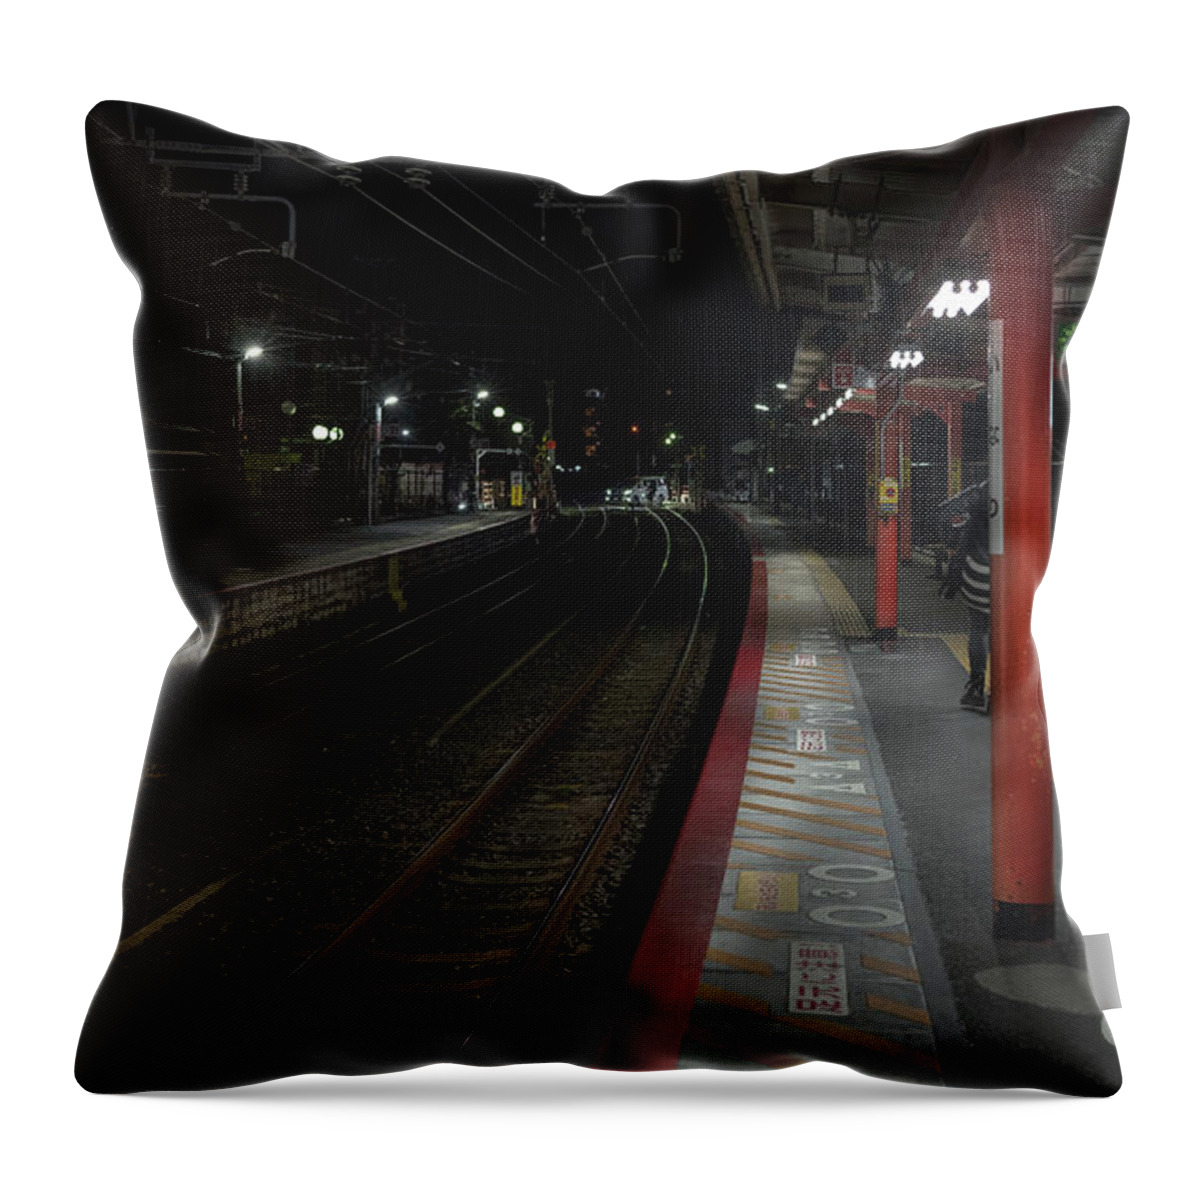 Columns Throw Pillow featuring the photograph Inari Station, Kyoto Japan by Perry Rodriguez